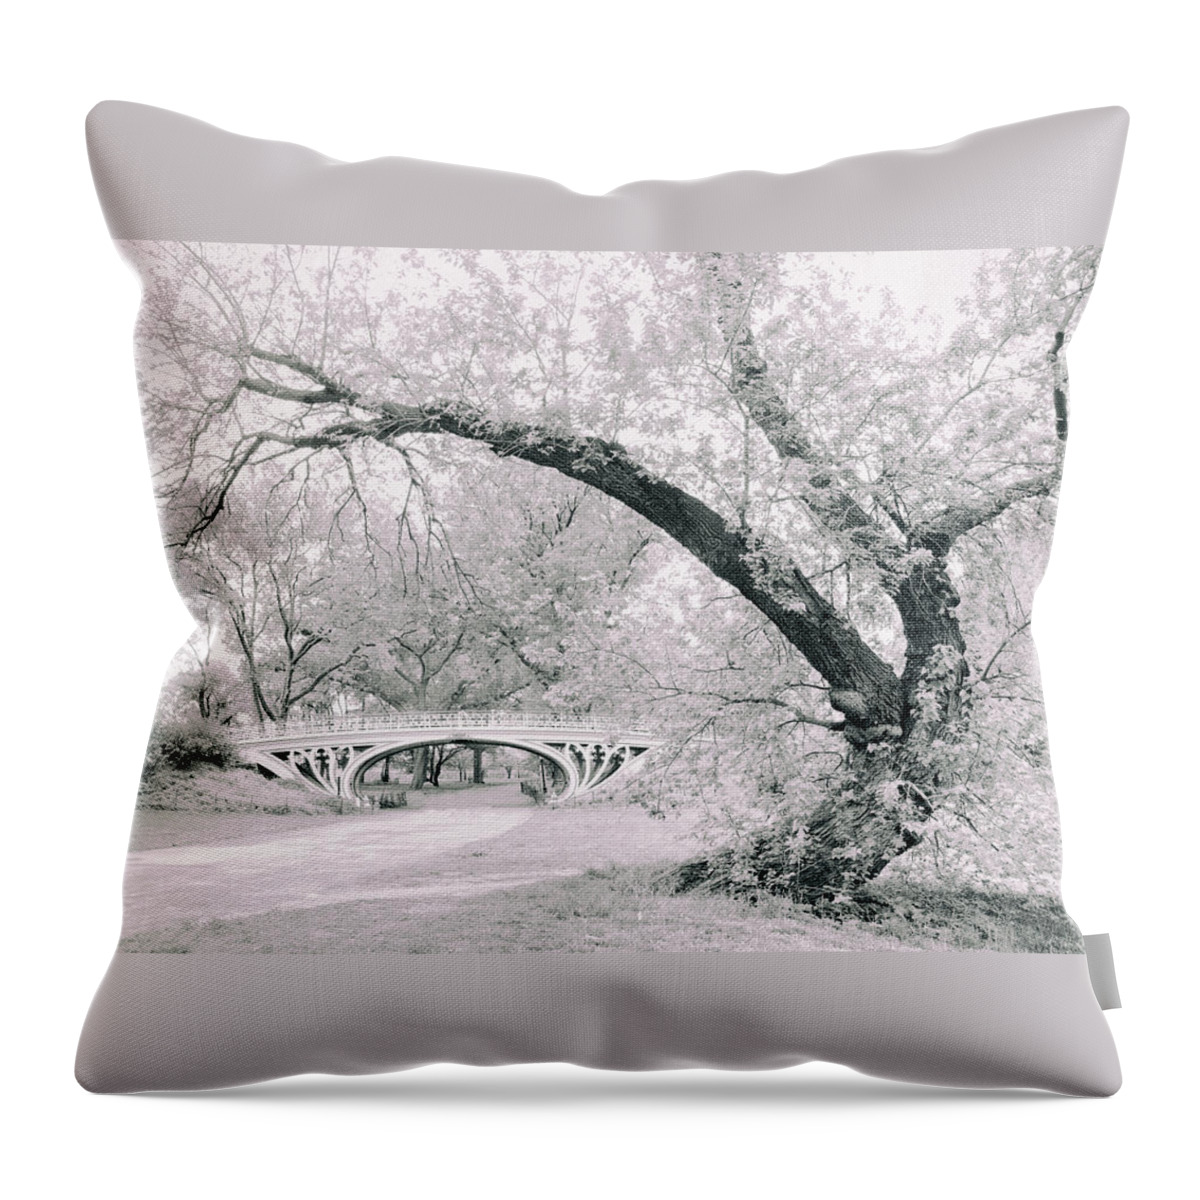 Gothic Bridge Throw Pillow featuring the photograph Gothic Bridge 28 by Jessica Jenney